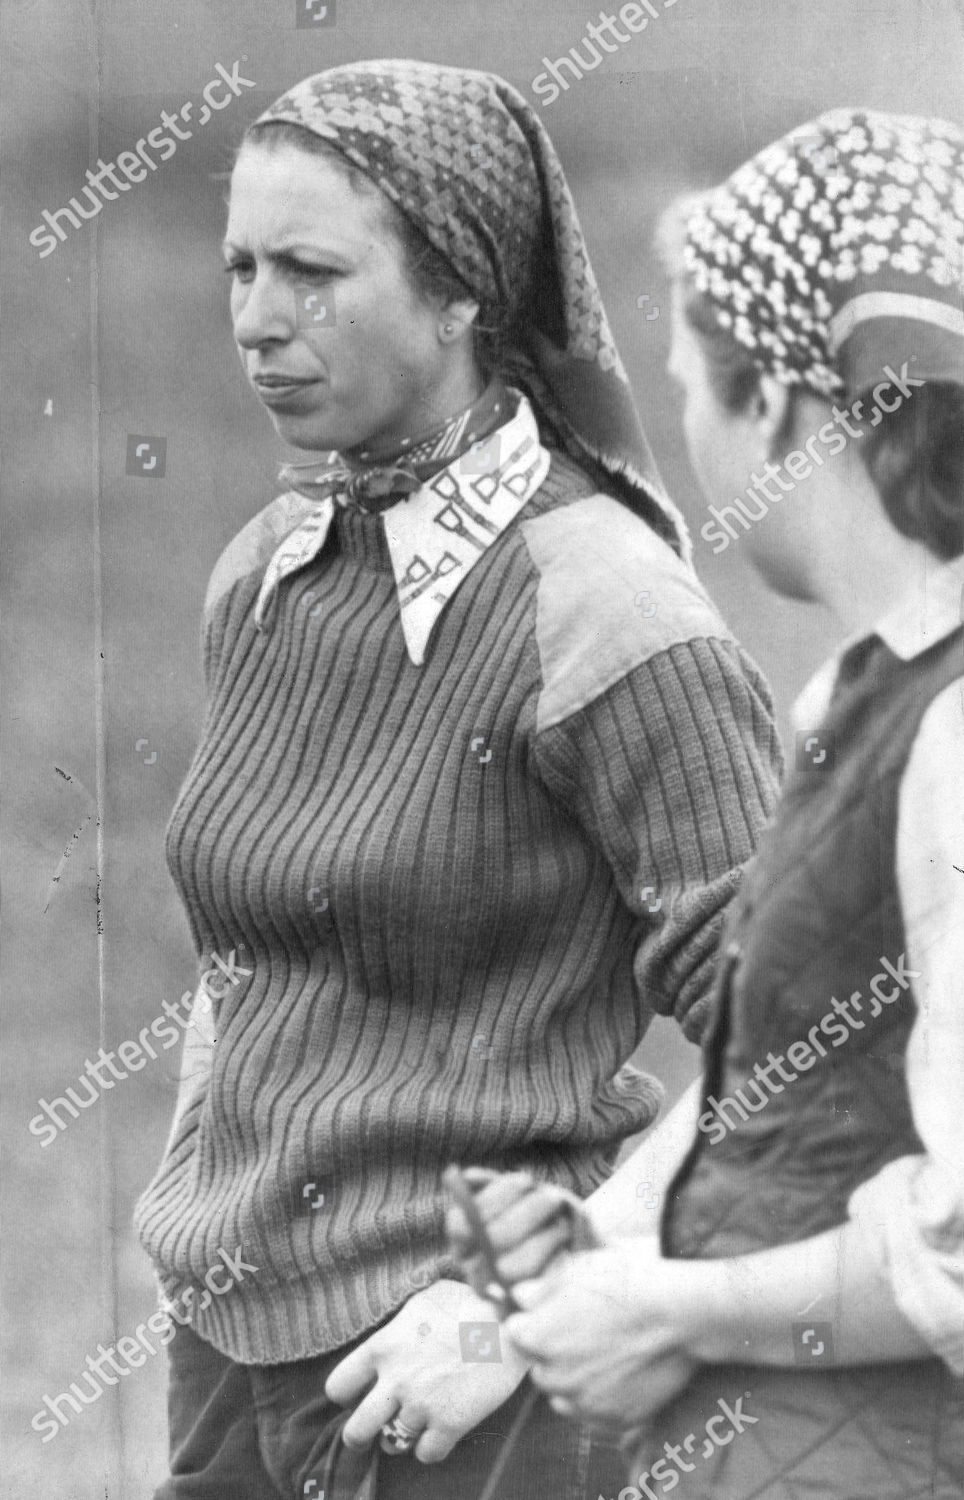 princess-anne-now-princess-royal-horse-riding-picture-shows-princess-anne-taking-a-stroll-on-the-course-before-taking-part-in-badminton-horse-trials-she-was-riding-13th-in-the-dressage-event-a-crowd-of-only-a-few-hundred-braved-the-bleak-weath-shutterstock-editorial-891143a.jpg